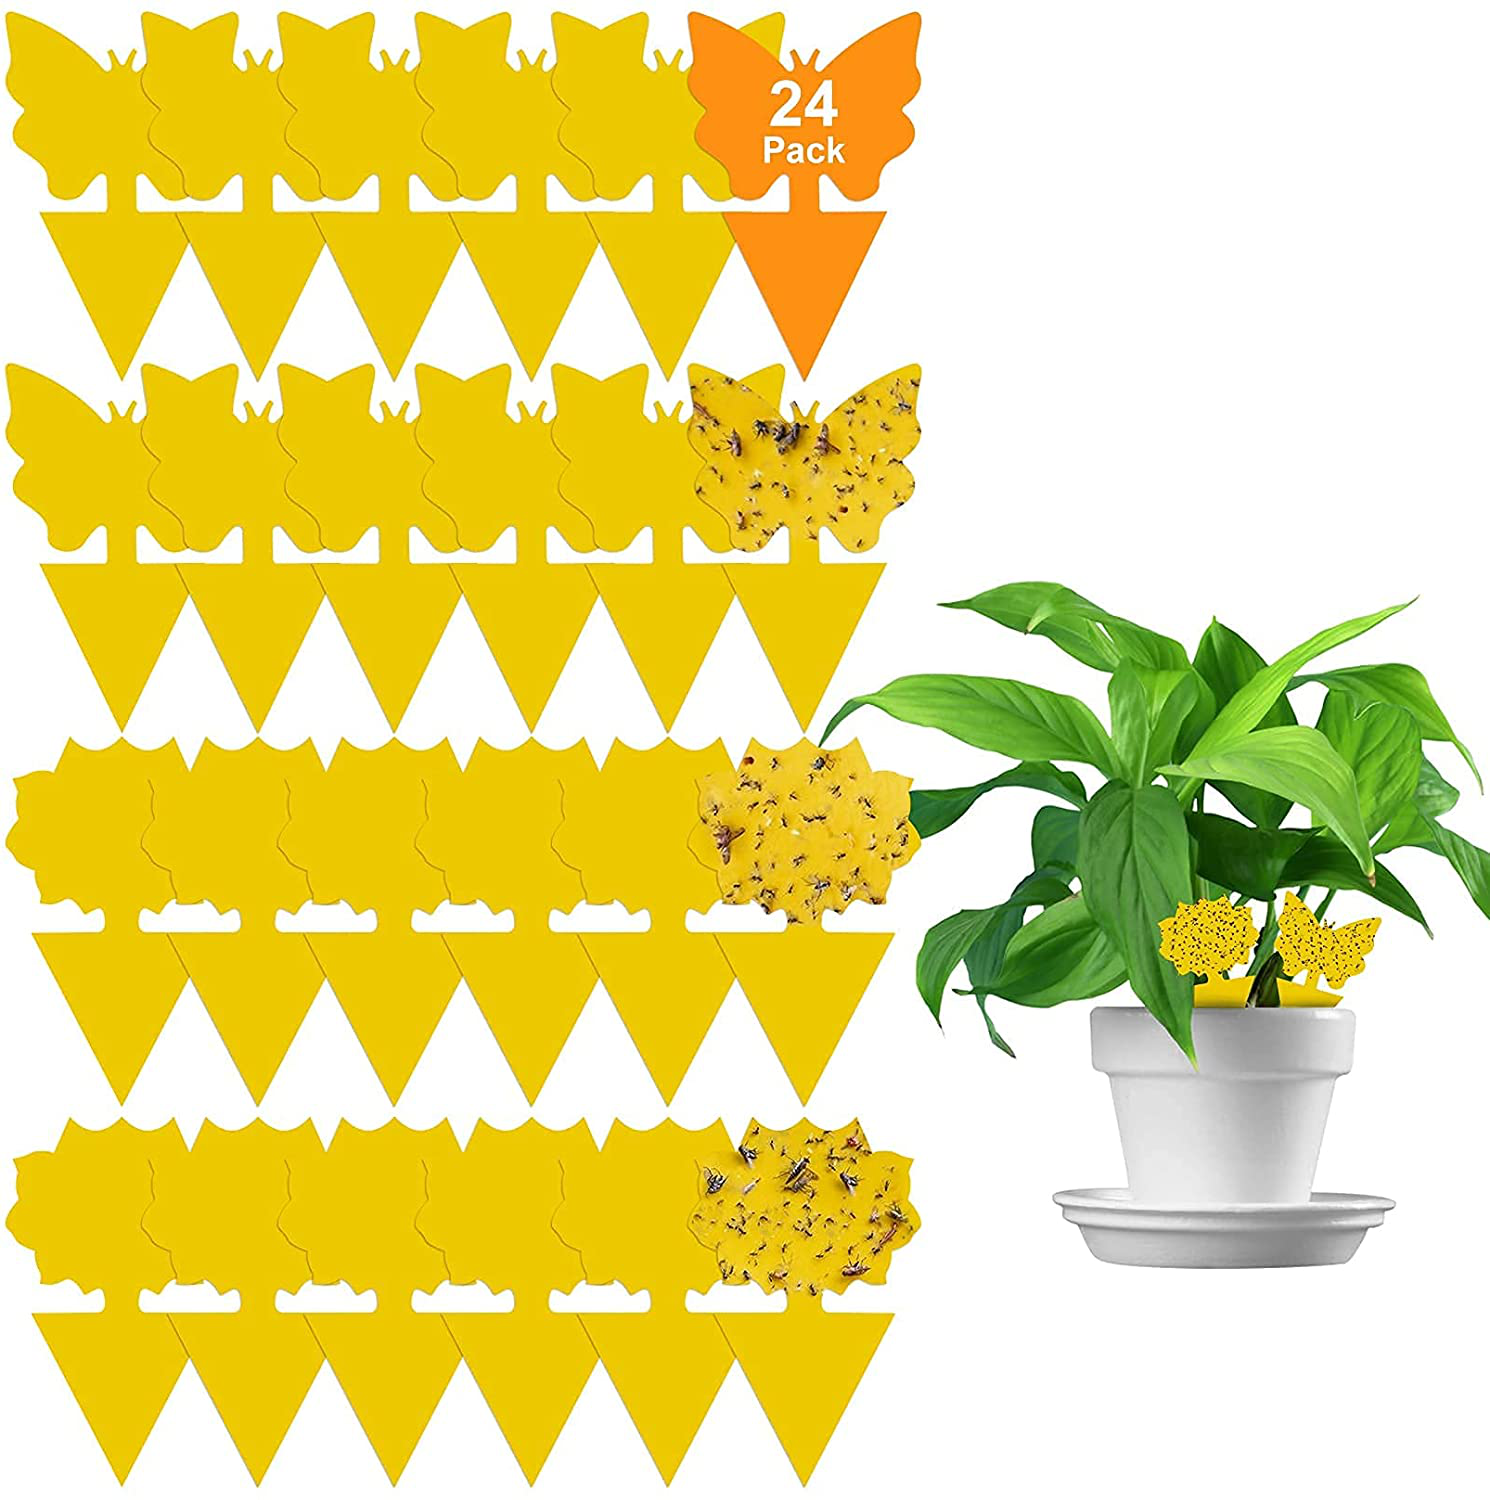 24 Pack Yellow Sticky Traps and Fungus Gnat Traps Killer for Indoor Outdoor, Fruit Fly Traps Protect The Plants